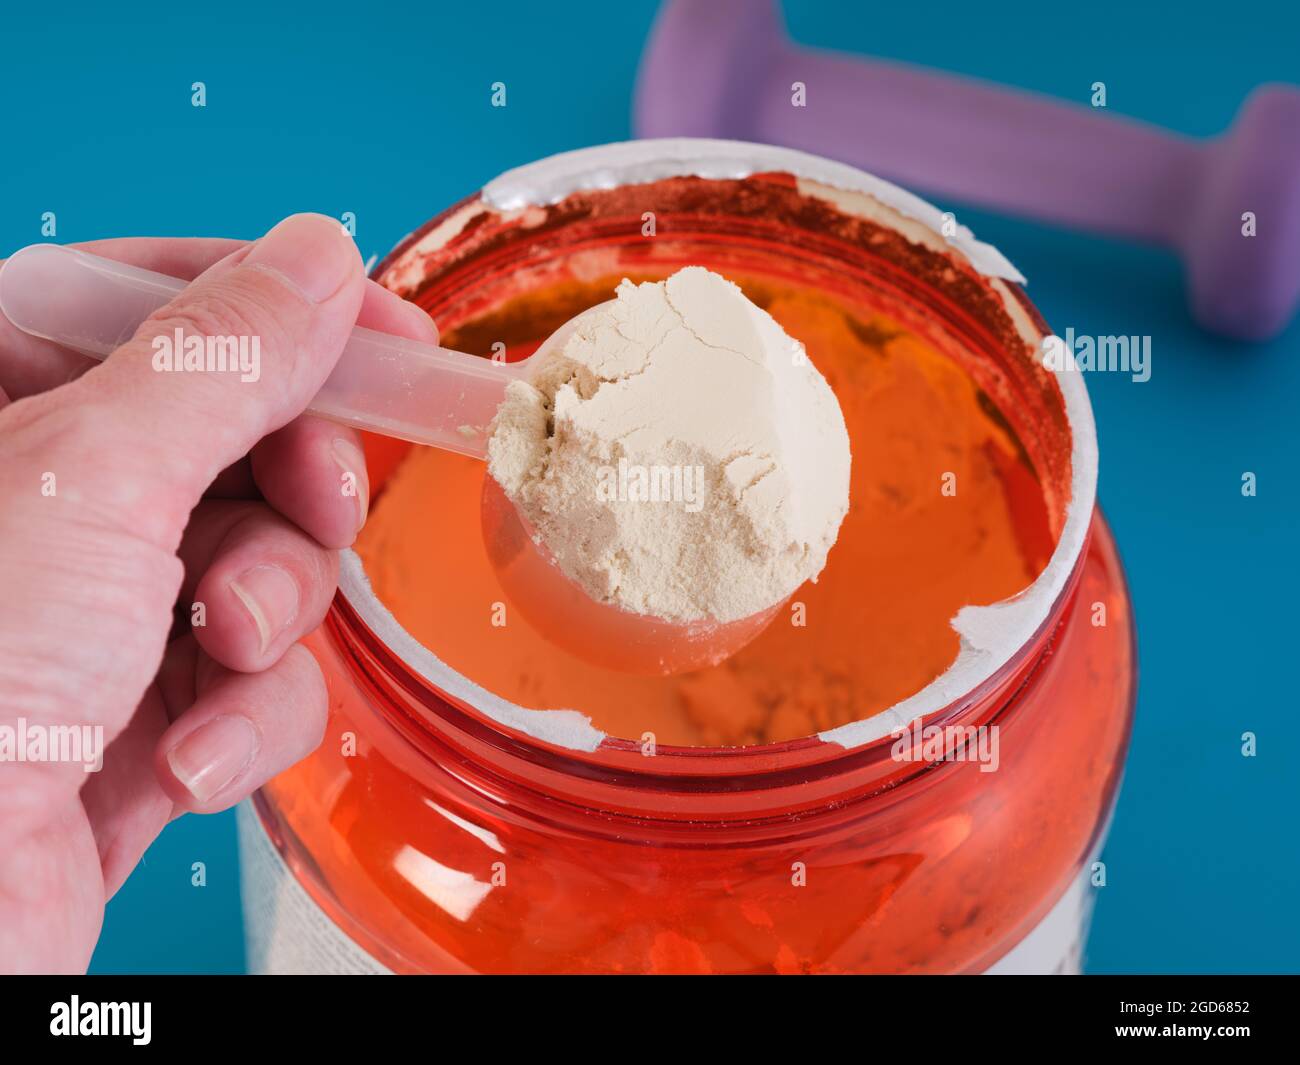 https://c8.alamy.com/comp/2GD6852/a-man-holding-a-scoop-of-soy-protein-isolate-powder-in-his-hand-close-up-2GD6852.jpg